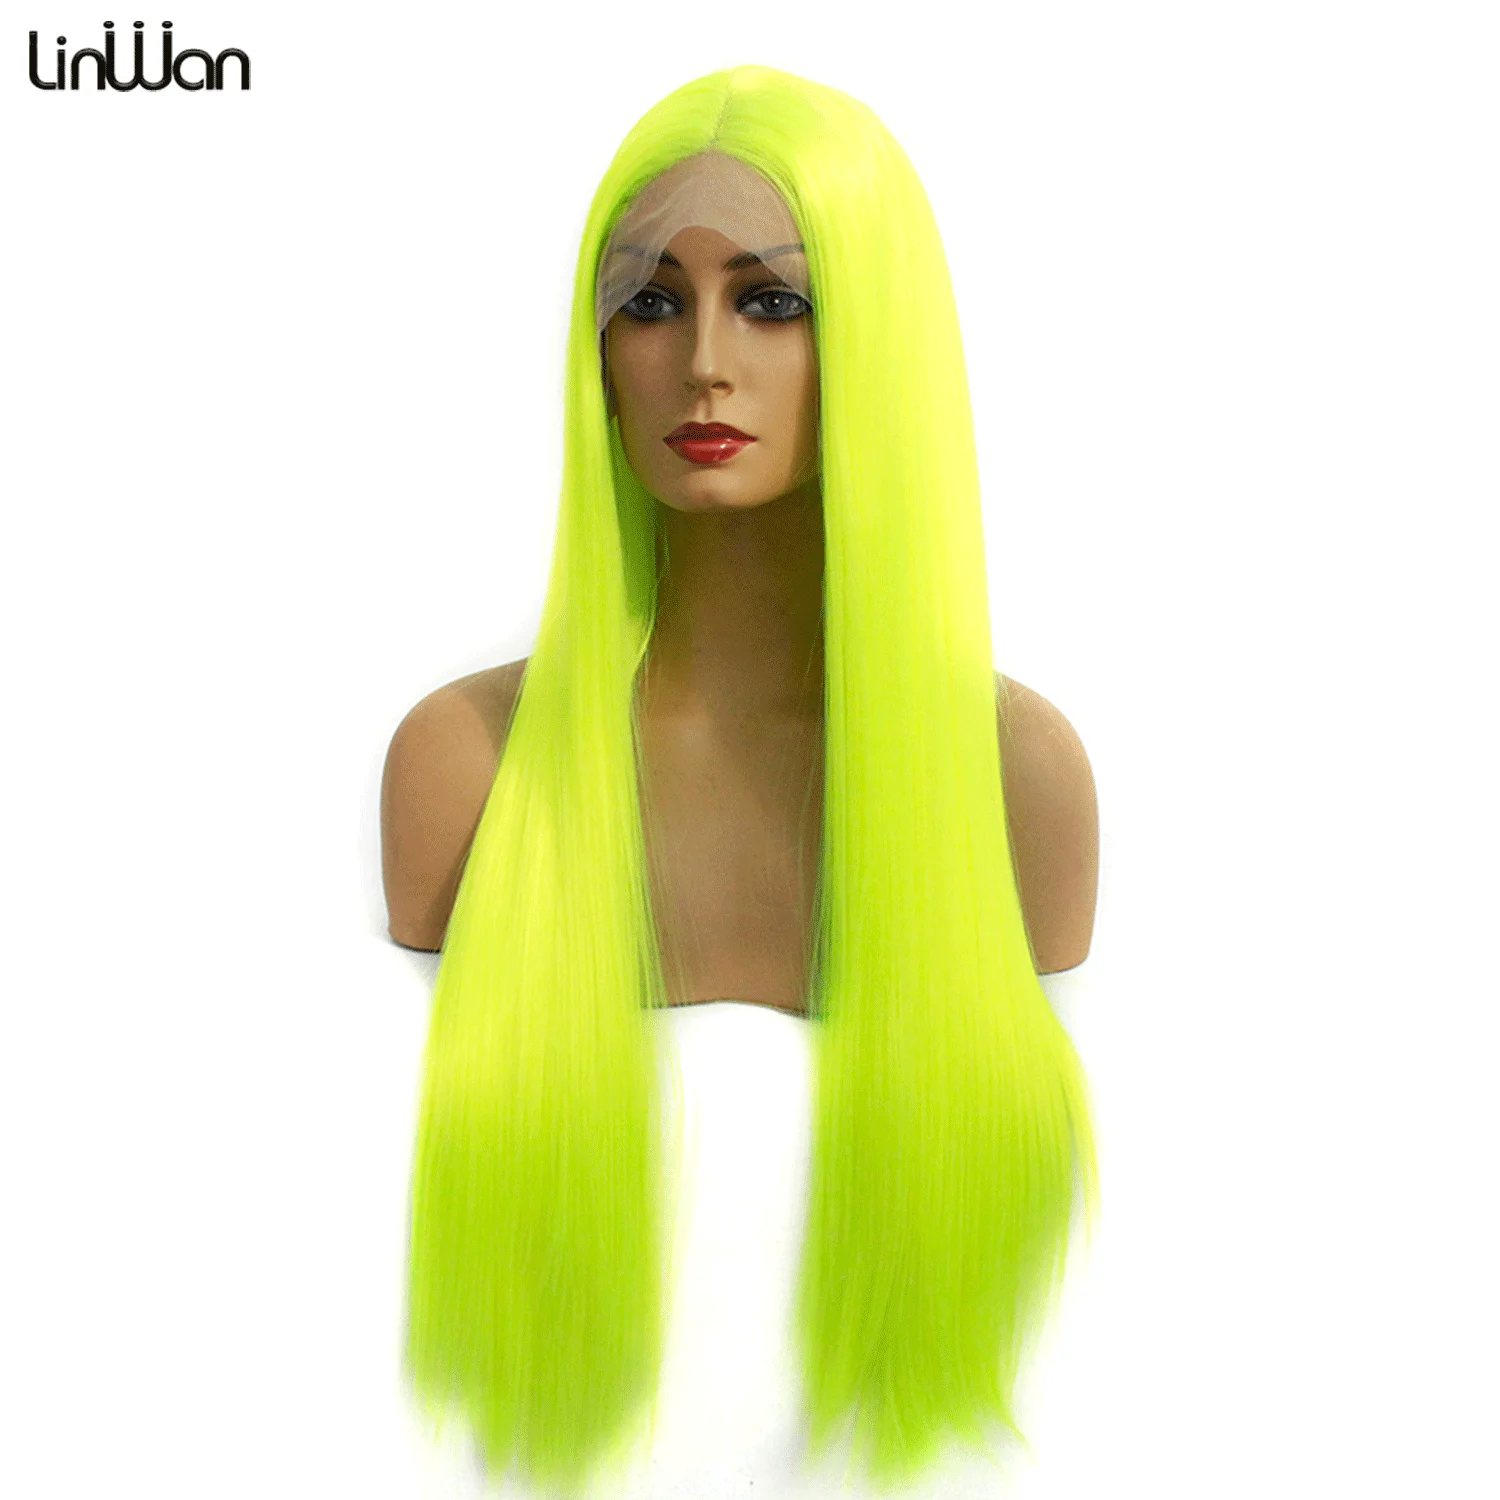 Fluorescent Green Wig Synthetic Lace Front Wig For Women Long Silky Straight Hair Natural Hairline Side Part Cosplay Wigs Linwan